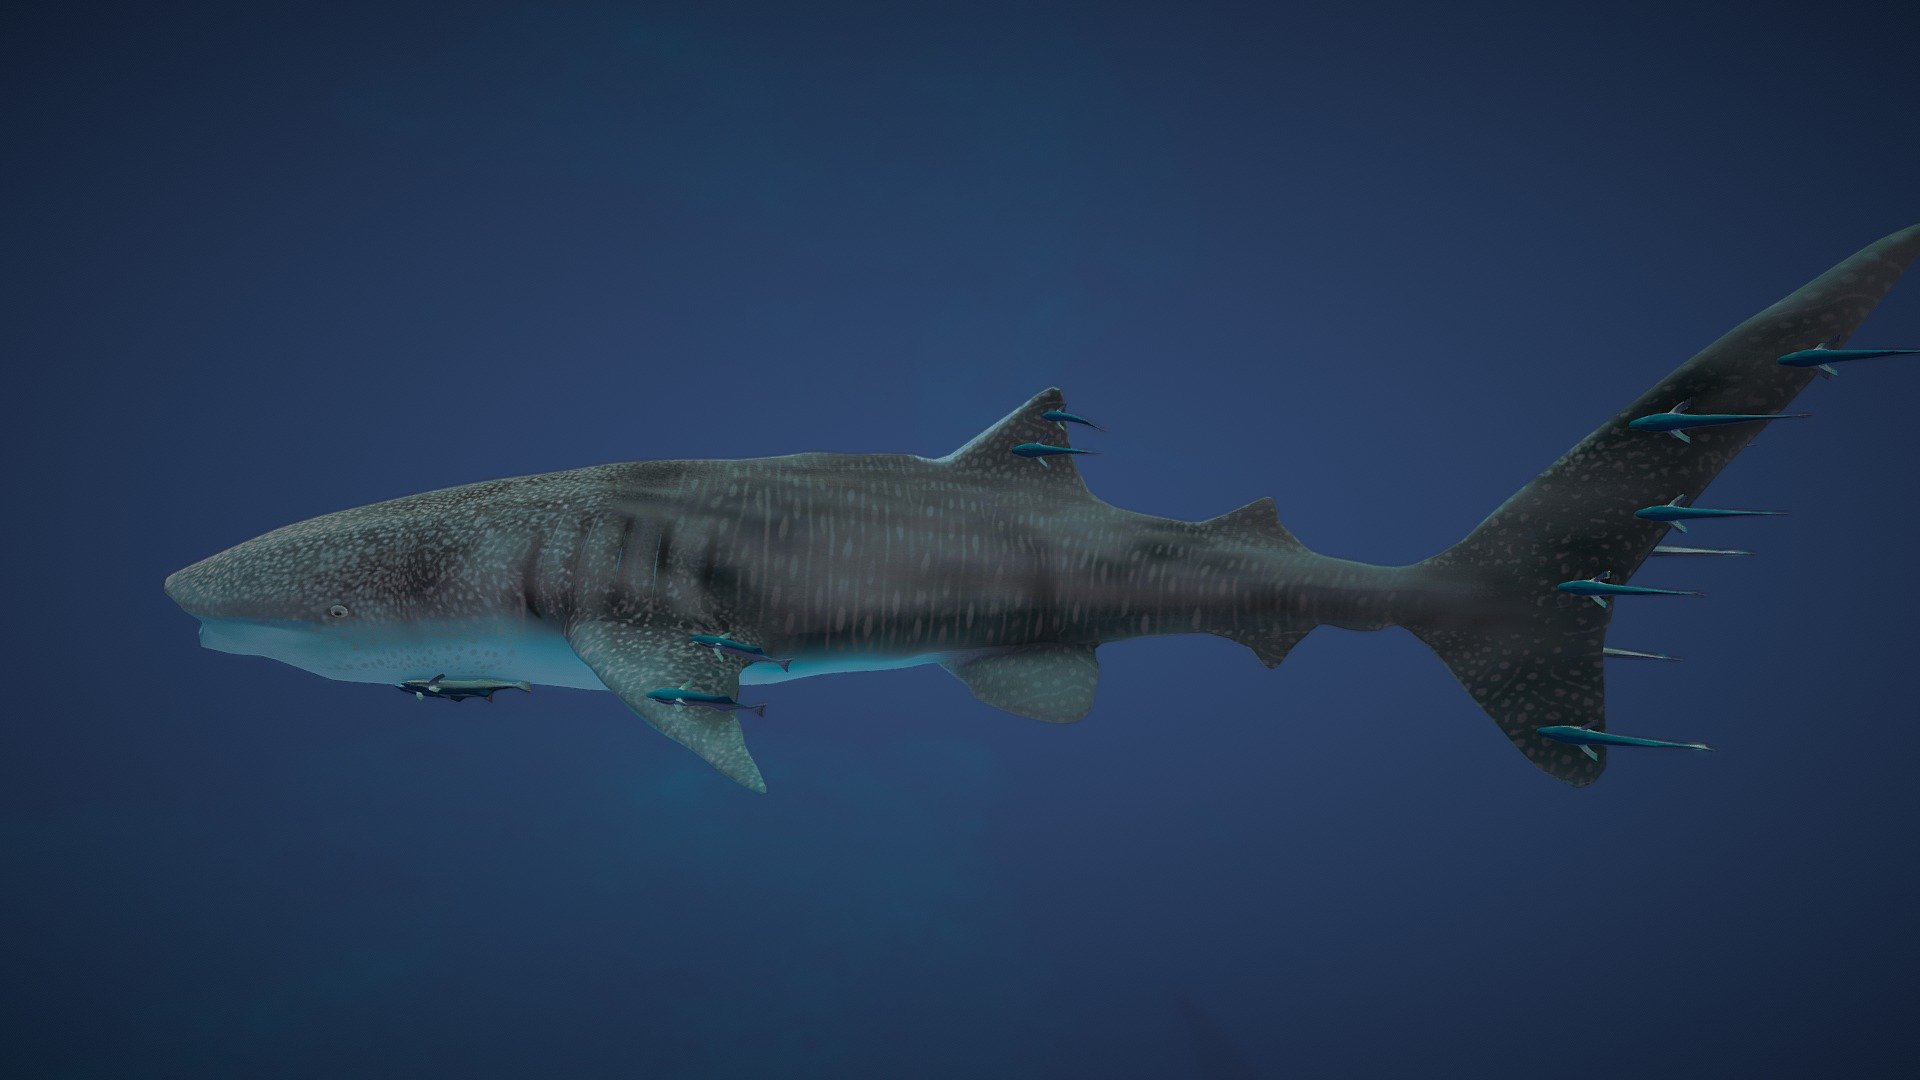 This whale shark / Rhincodon typus is one of some animals I made for an upcoming VR educational game. To add the Remora fish was quite challenging, but what do you think about it?

see here one of my references
read more about it here

Everything is made by myself.
Modelling, rigging, morphing and animation in 3ds Max.
Sculpting, retopology and baking in 3D Coat.
Texturing in Substance Painter.
Adjustments in Photoshop.
Made for Unreal Engine - Whale Shark With Remoras - 3D model by Chromasie 3d model